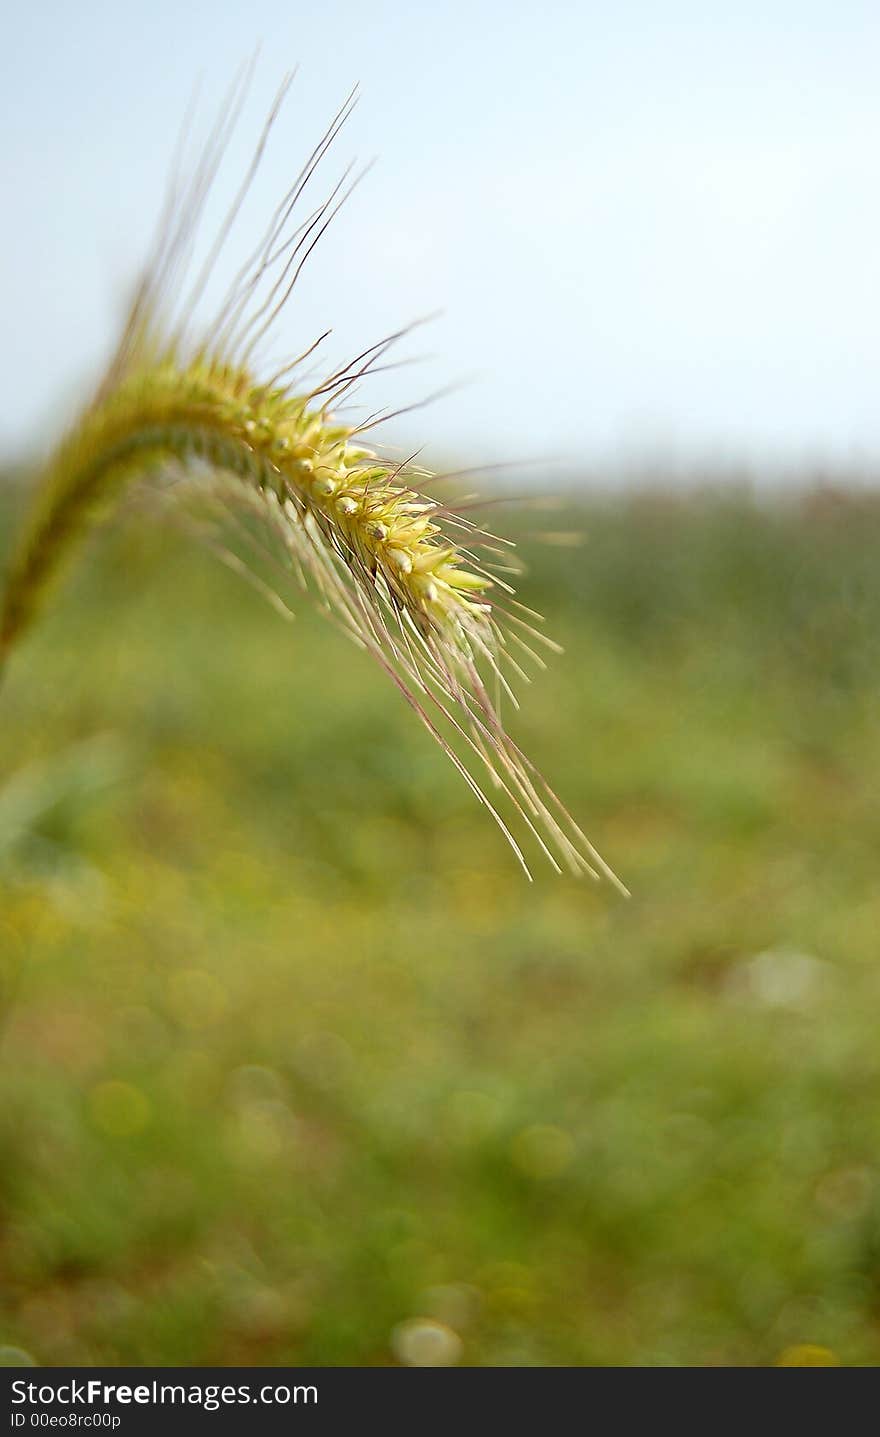 A green stalk pictured at the field. A green stalk pictured at the field.